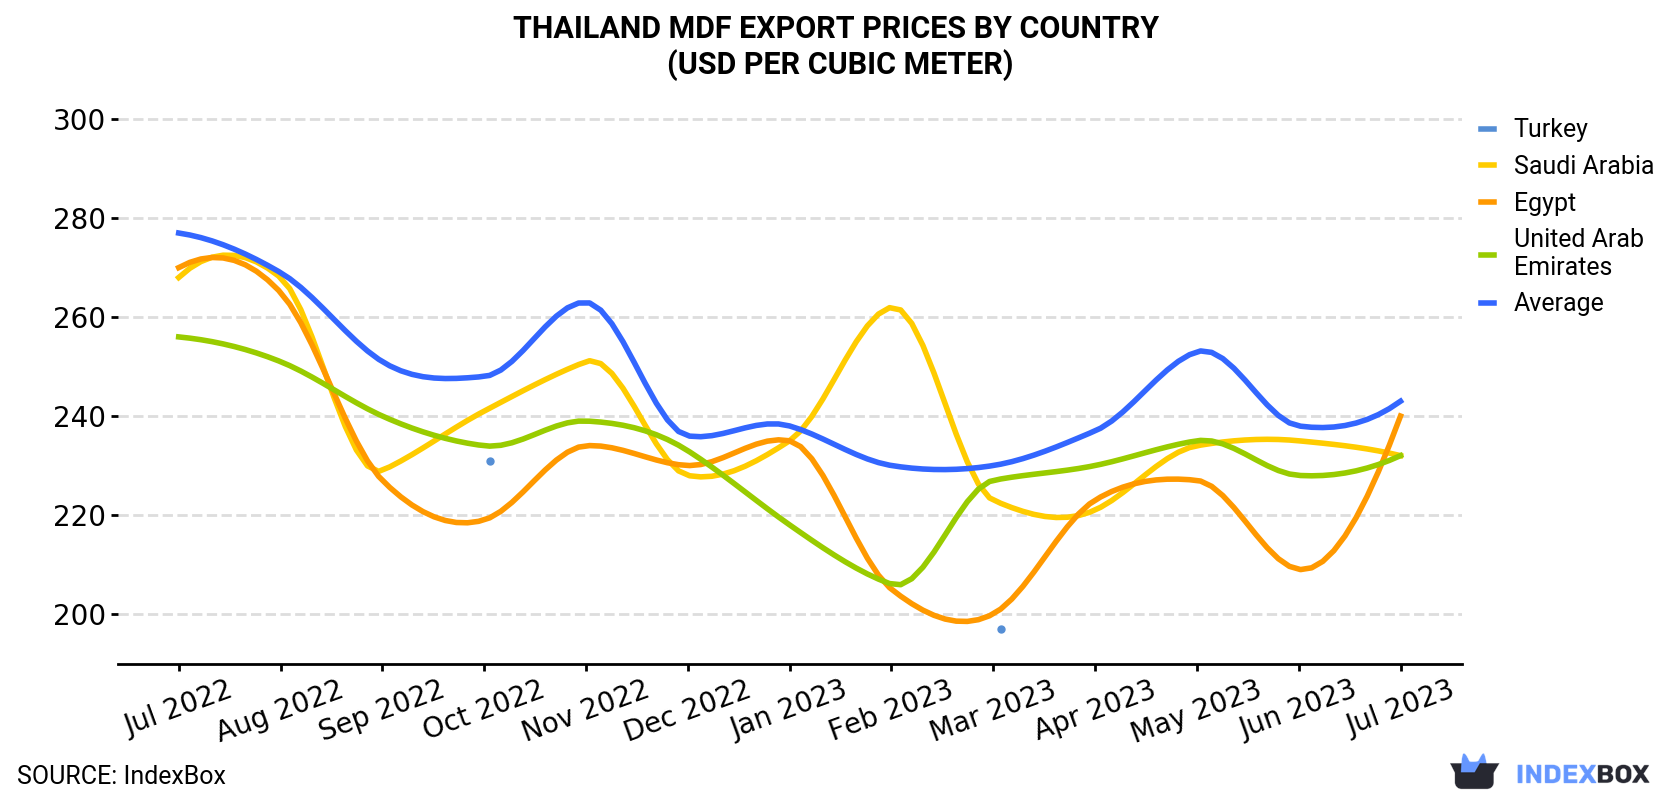 Thailand MDF Export Prices By Country (USD Per Cubic Meter)